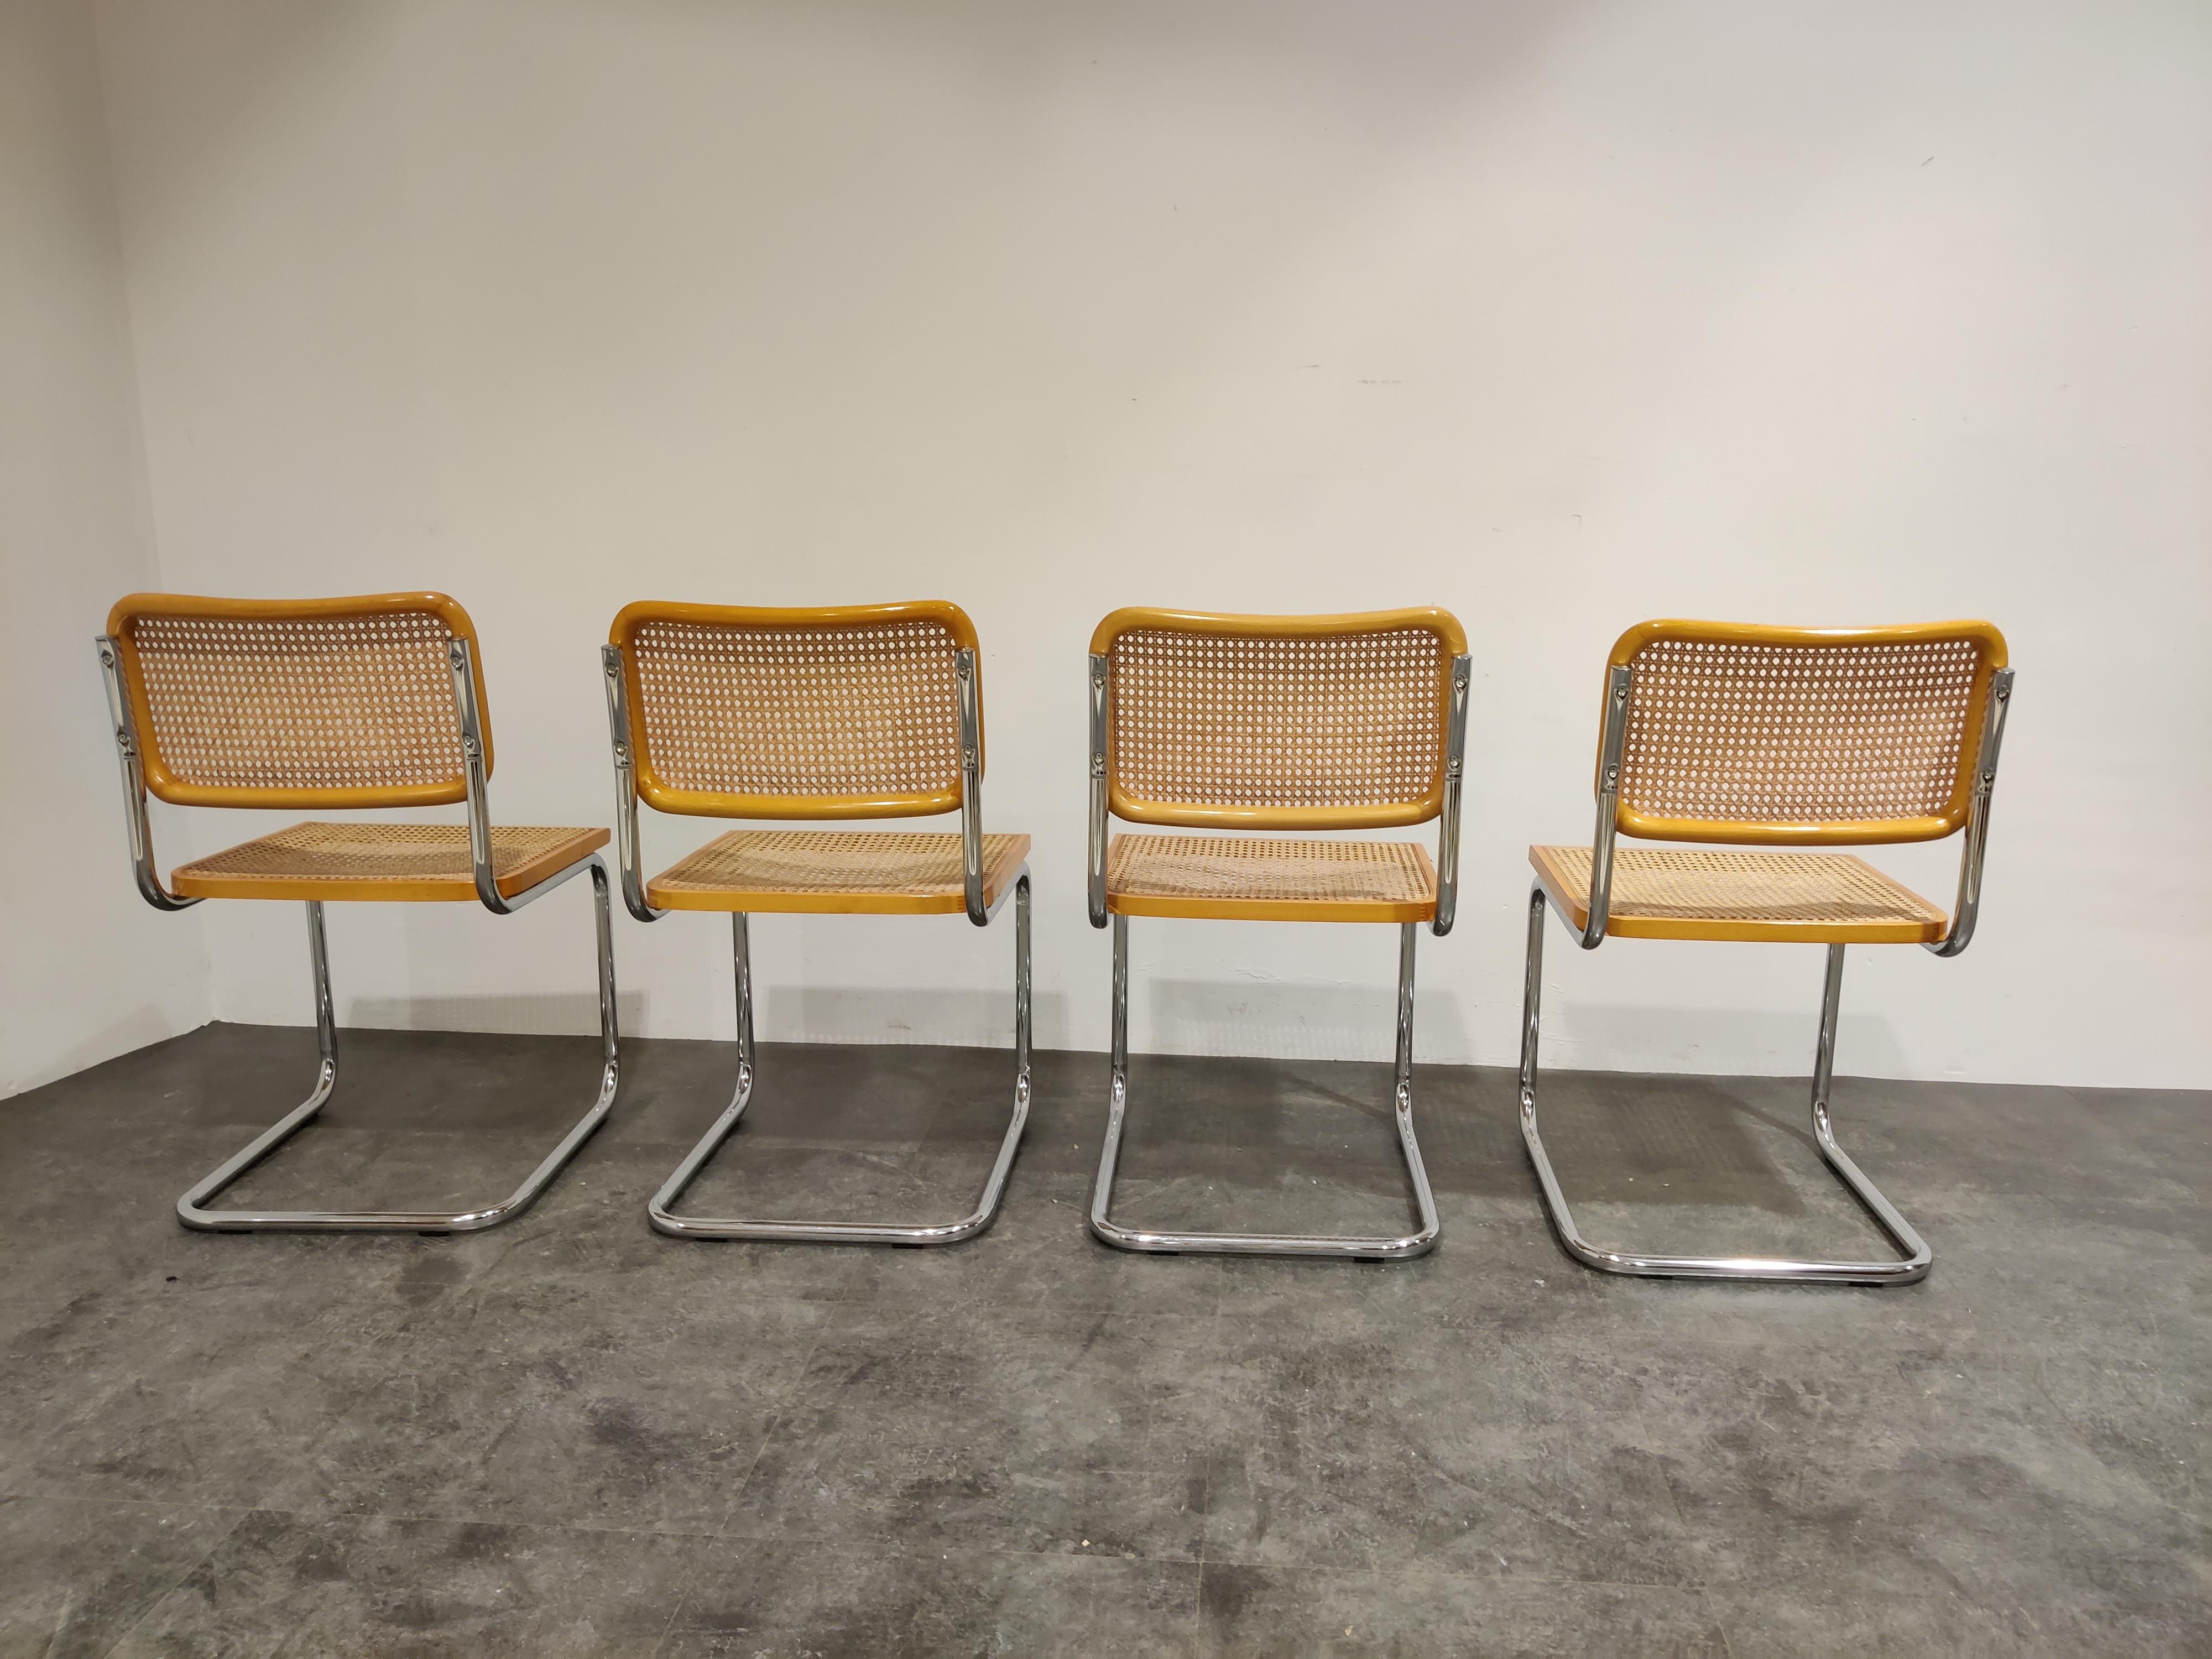 Set of 4 Vintage Marcel Breuer Cesca Chairs, Made in Italy, 1970s at ...